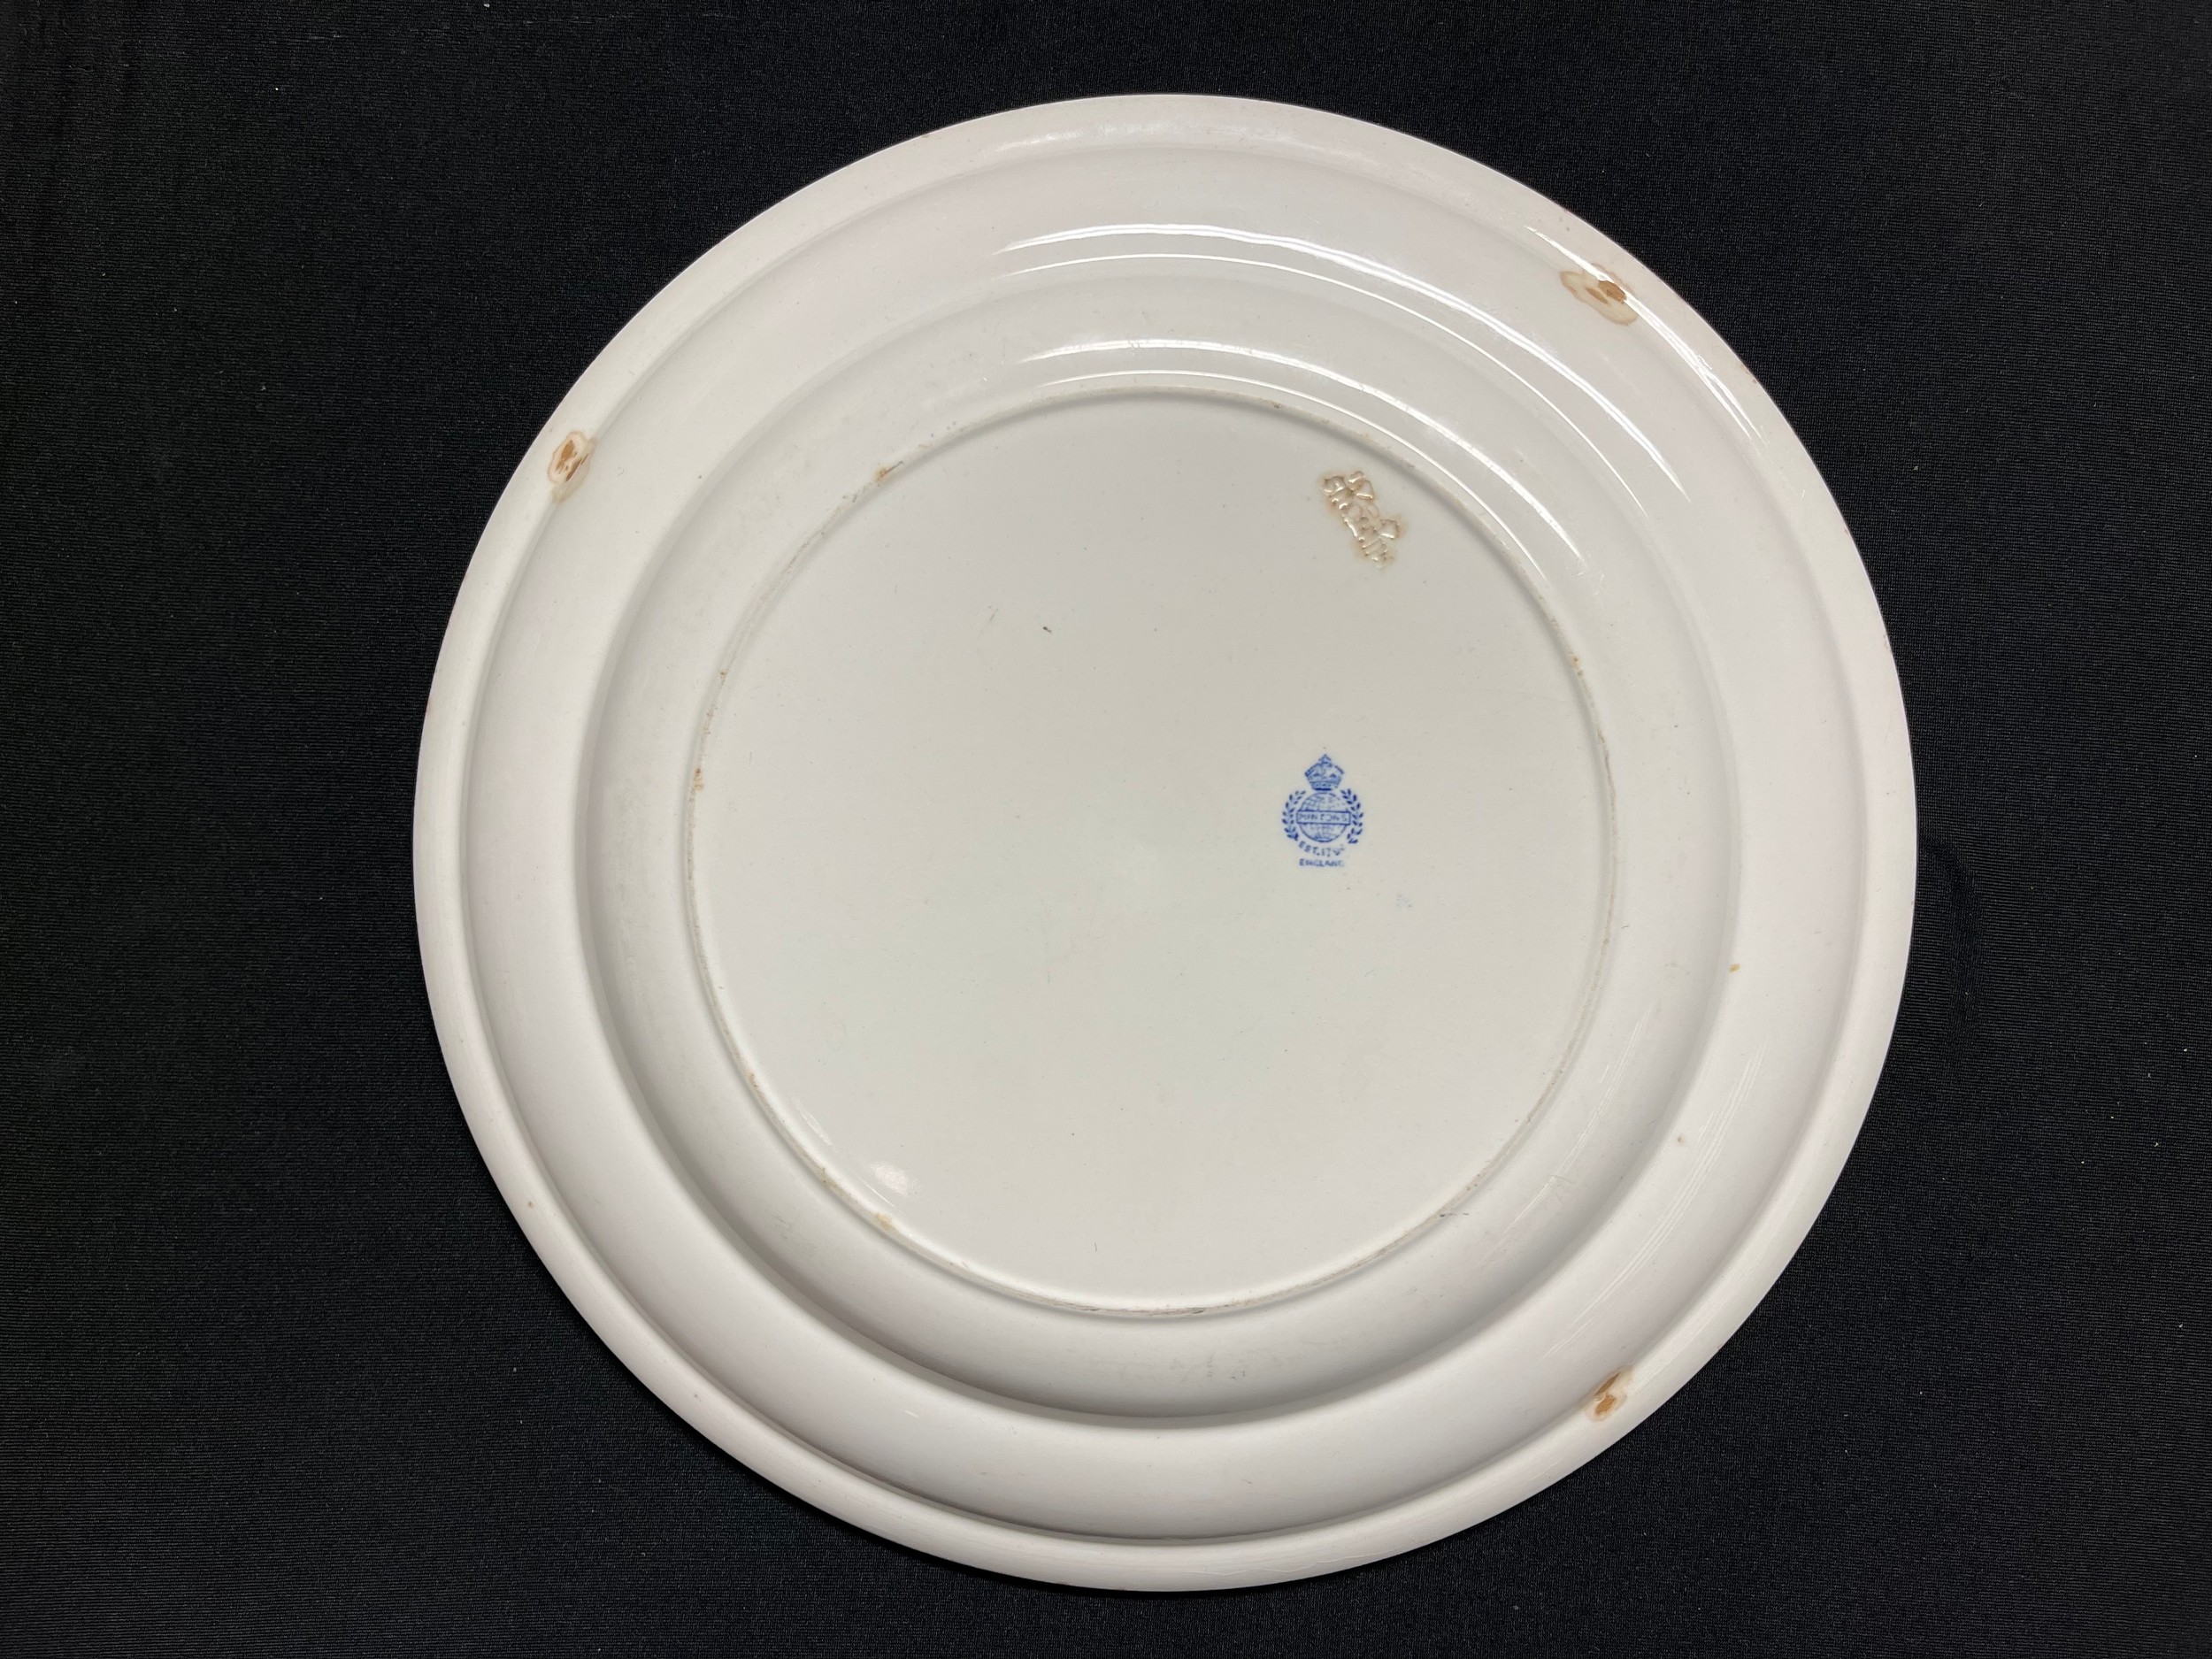 WW2 Royal Air Force Other Airmans mess eathernware dinner plate by Minton. 27cm in diameter. - Image 2 of 4